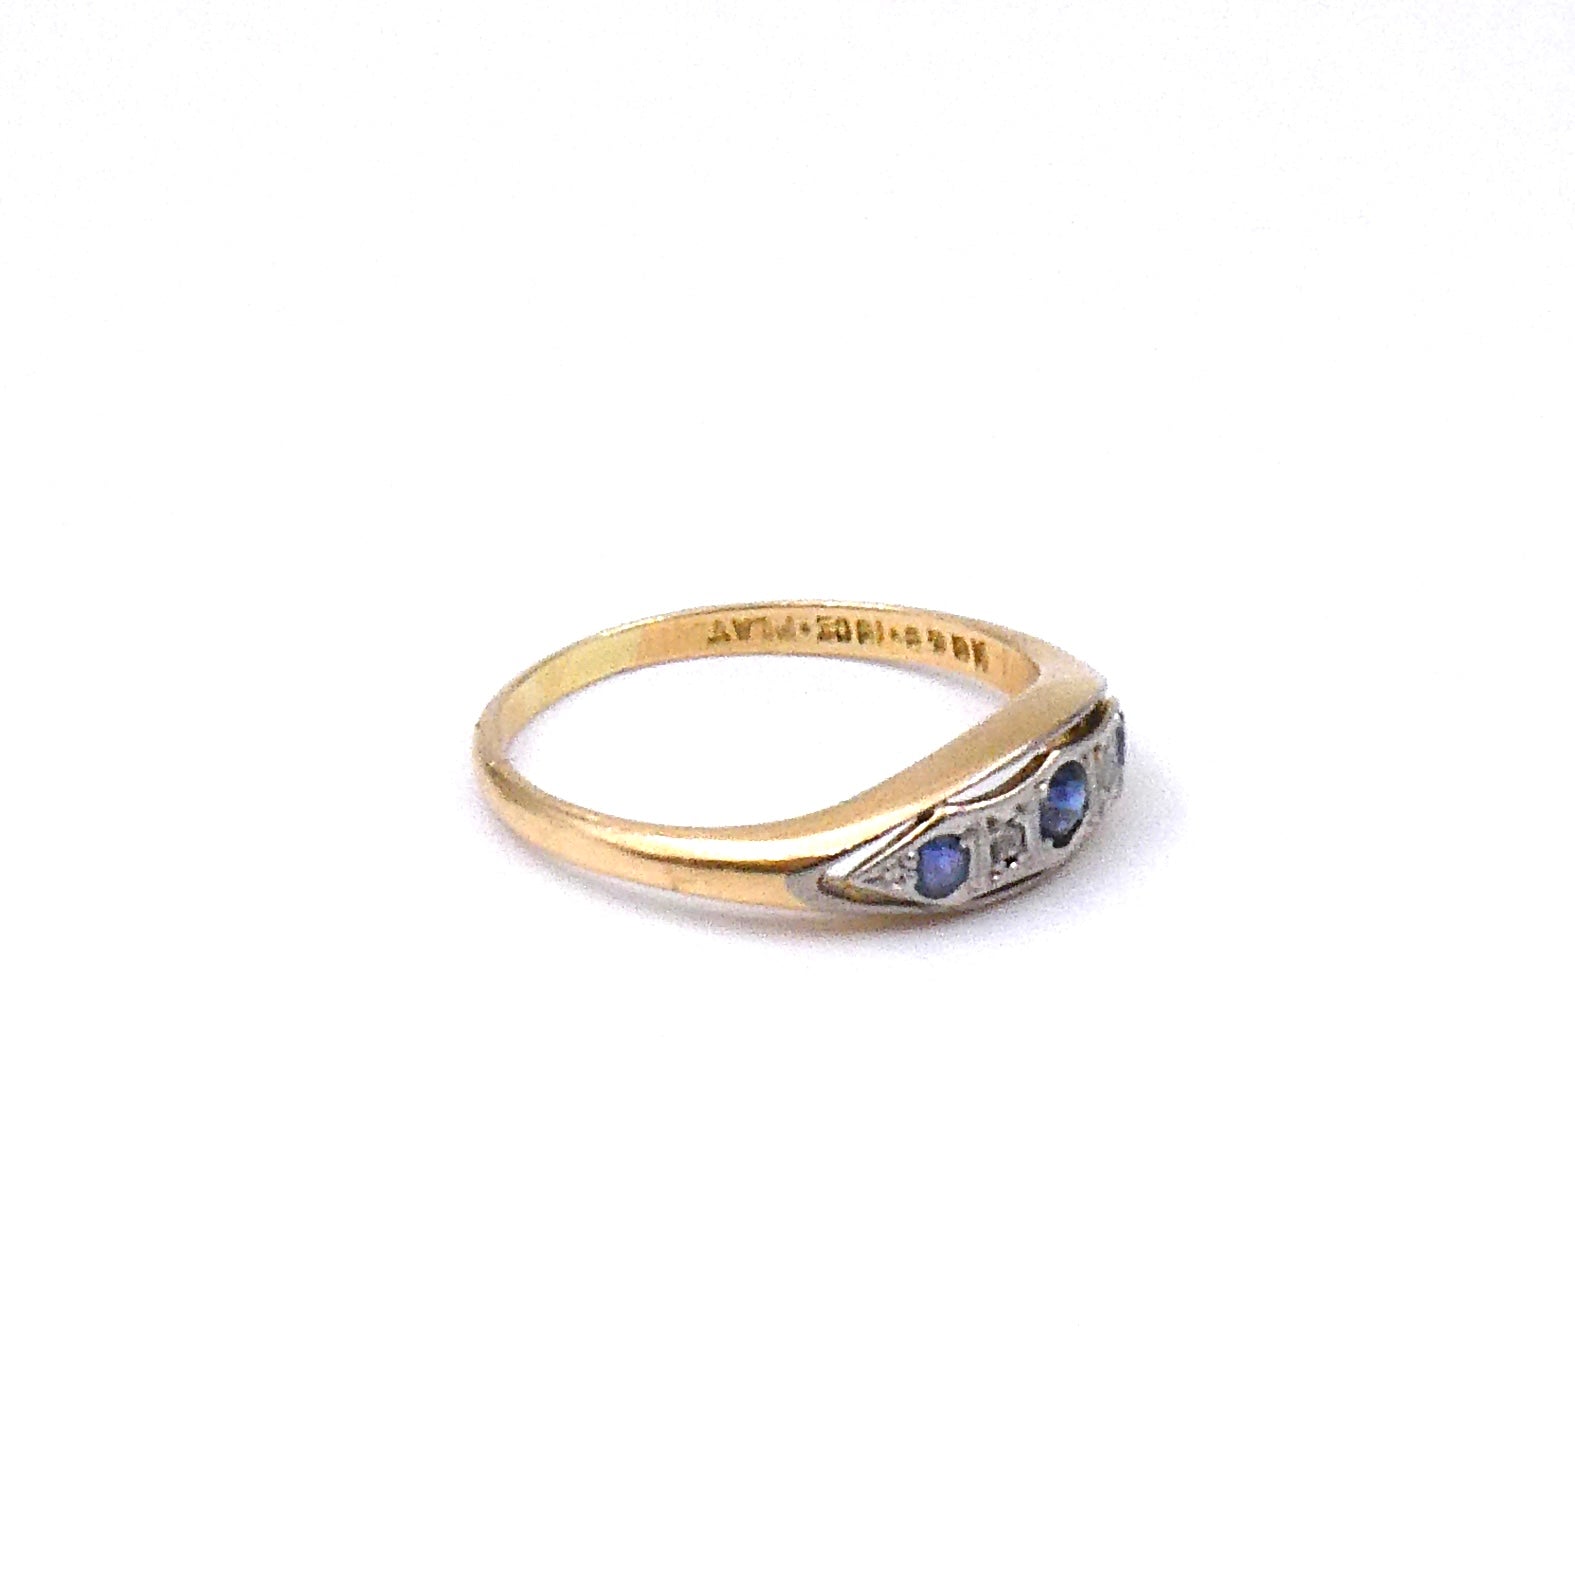 Elegant sapphire and diamond ring, horizontal navette shape, 18ct gold and platinun. - Collected